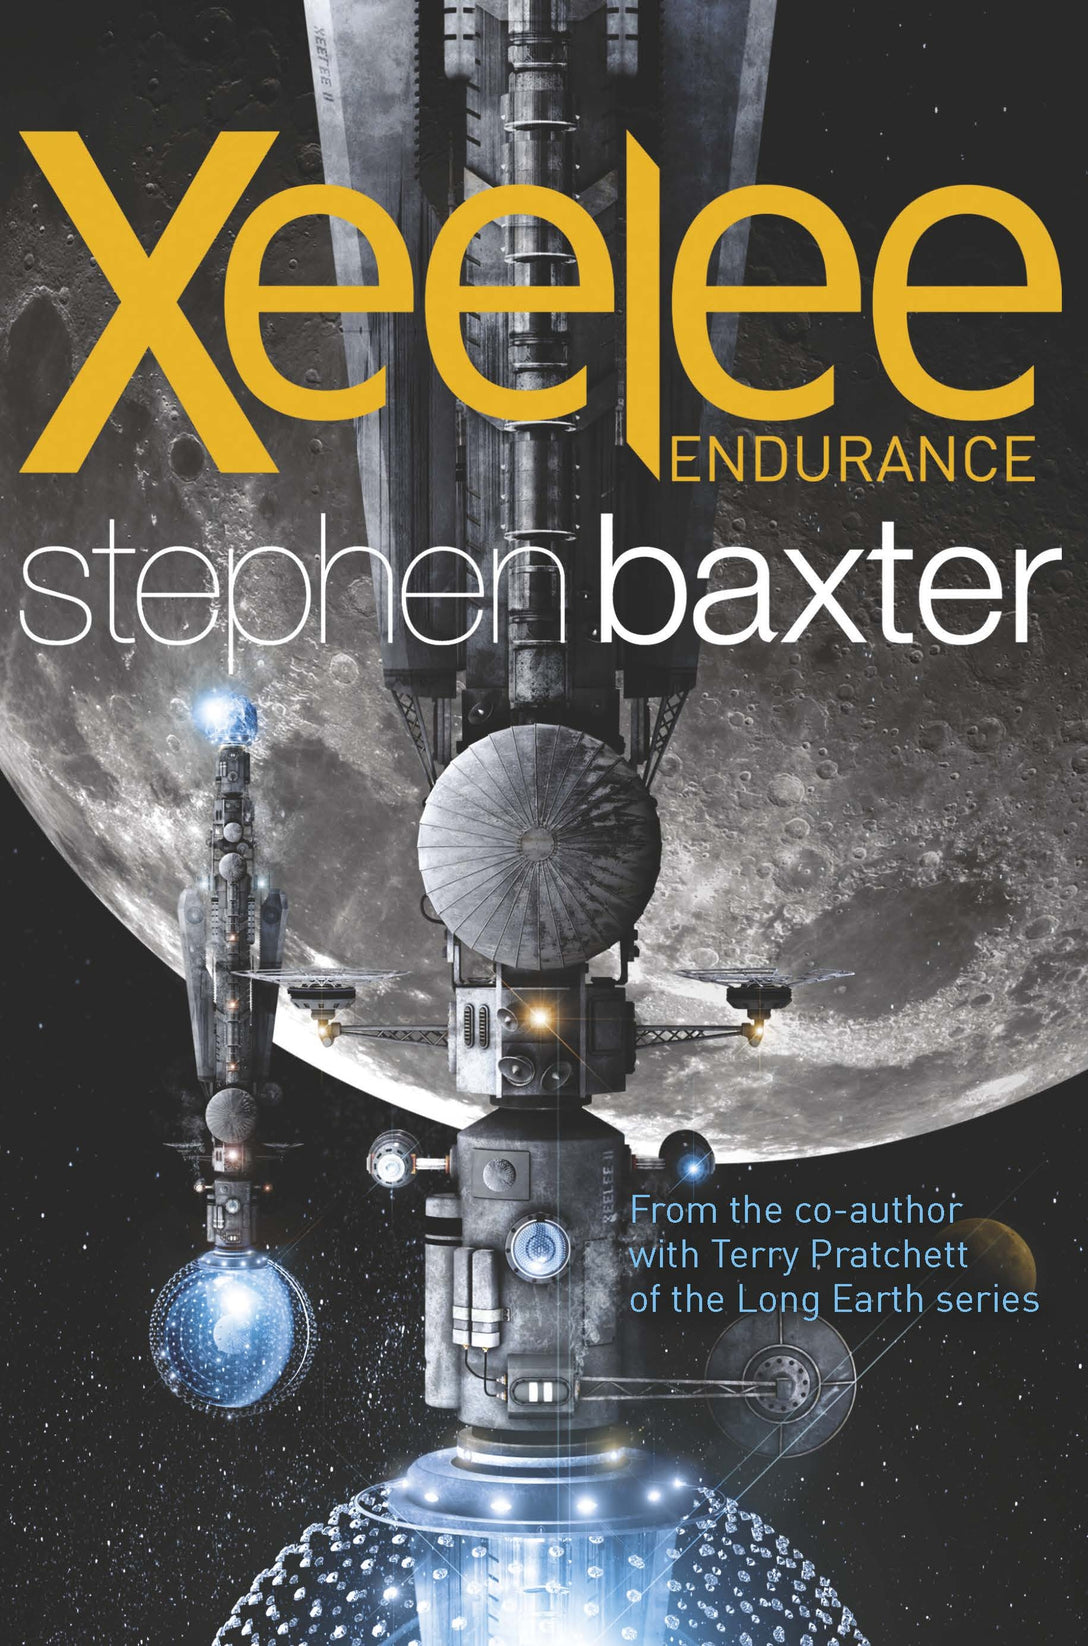 Xeelee: Endurance by Stephen Baxter